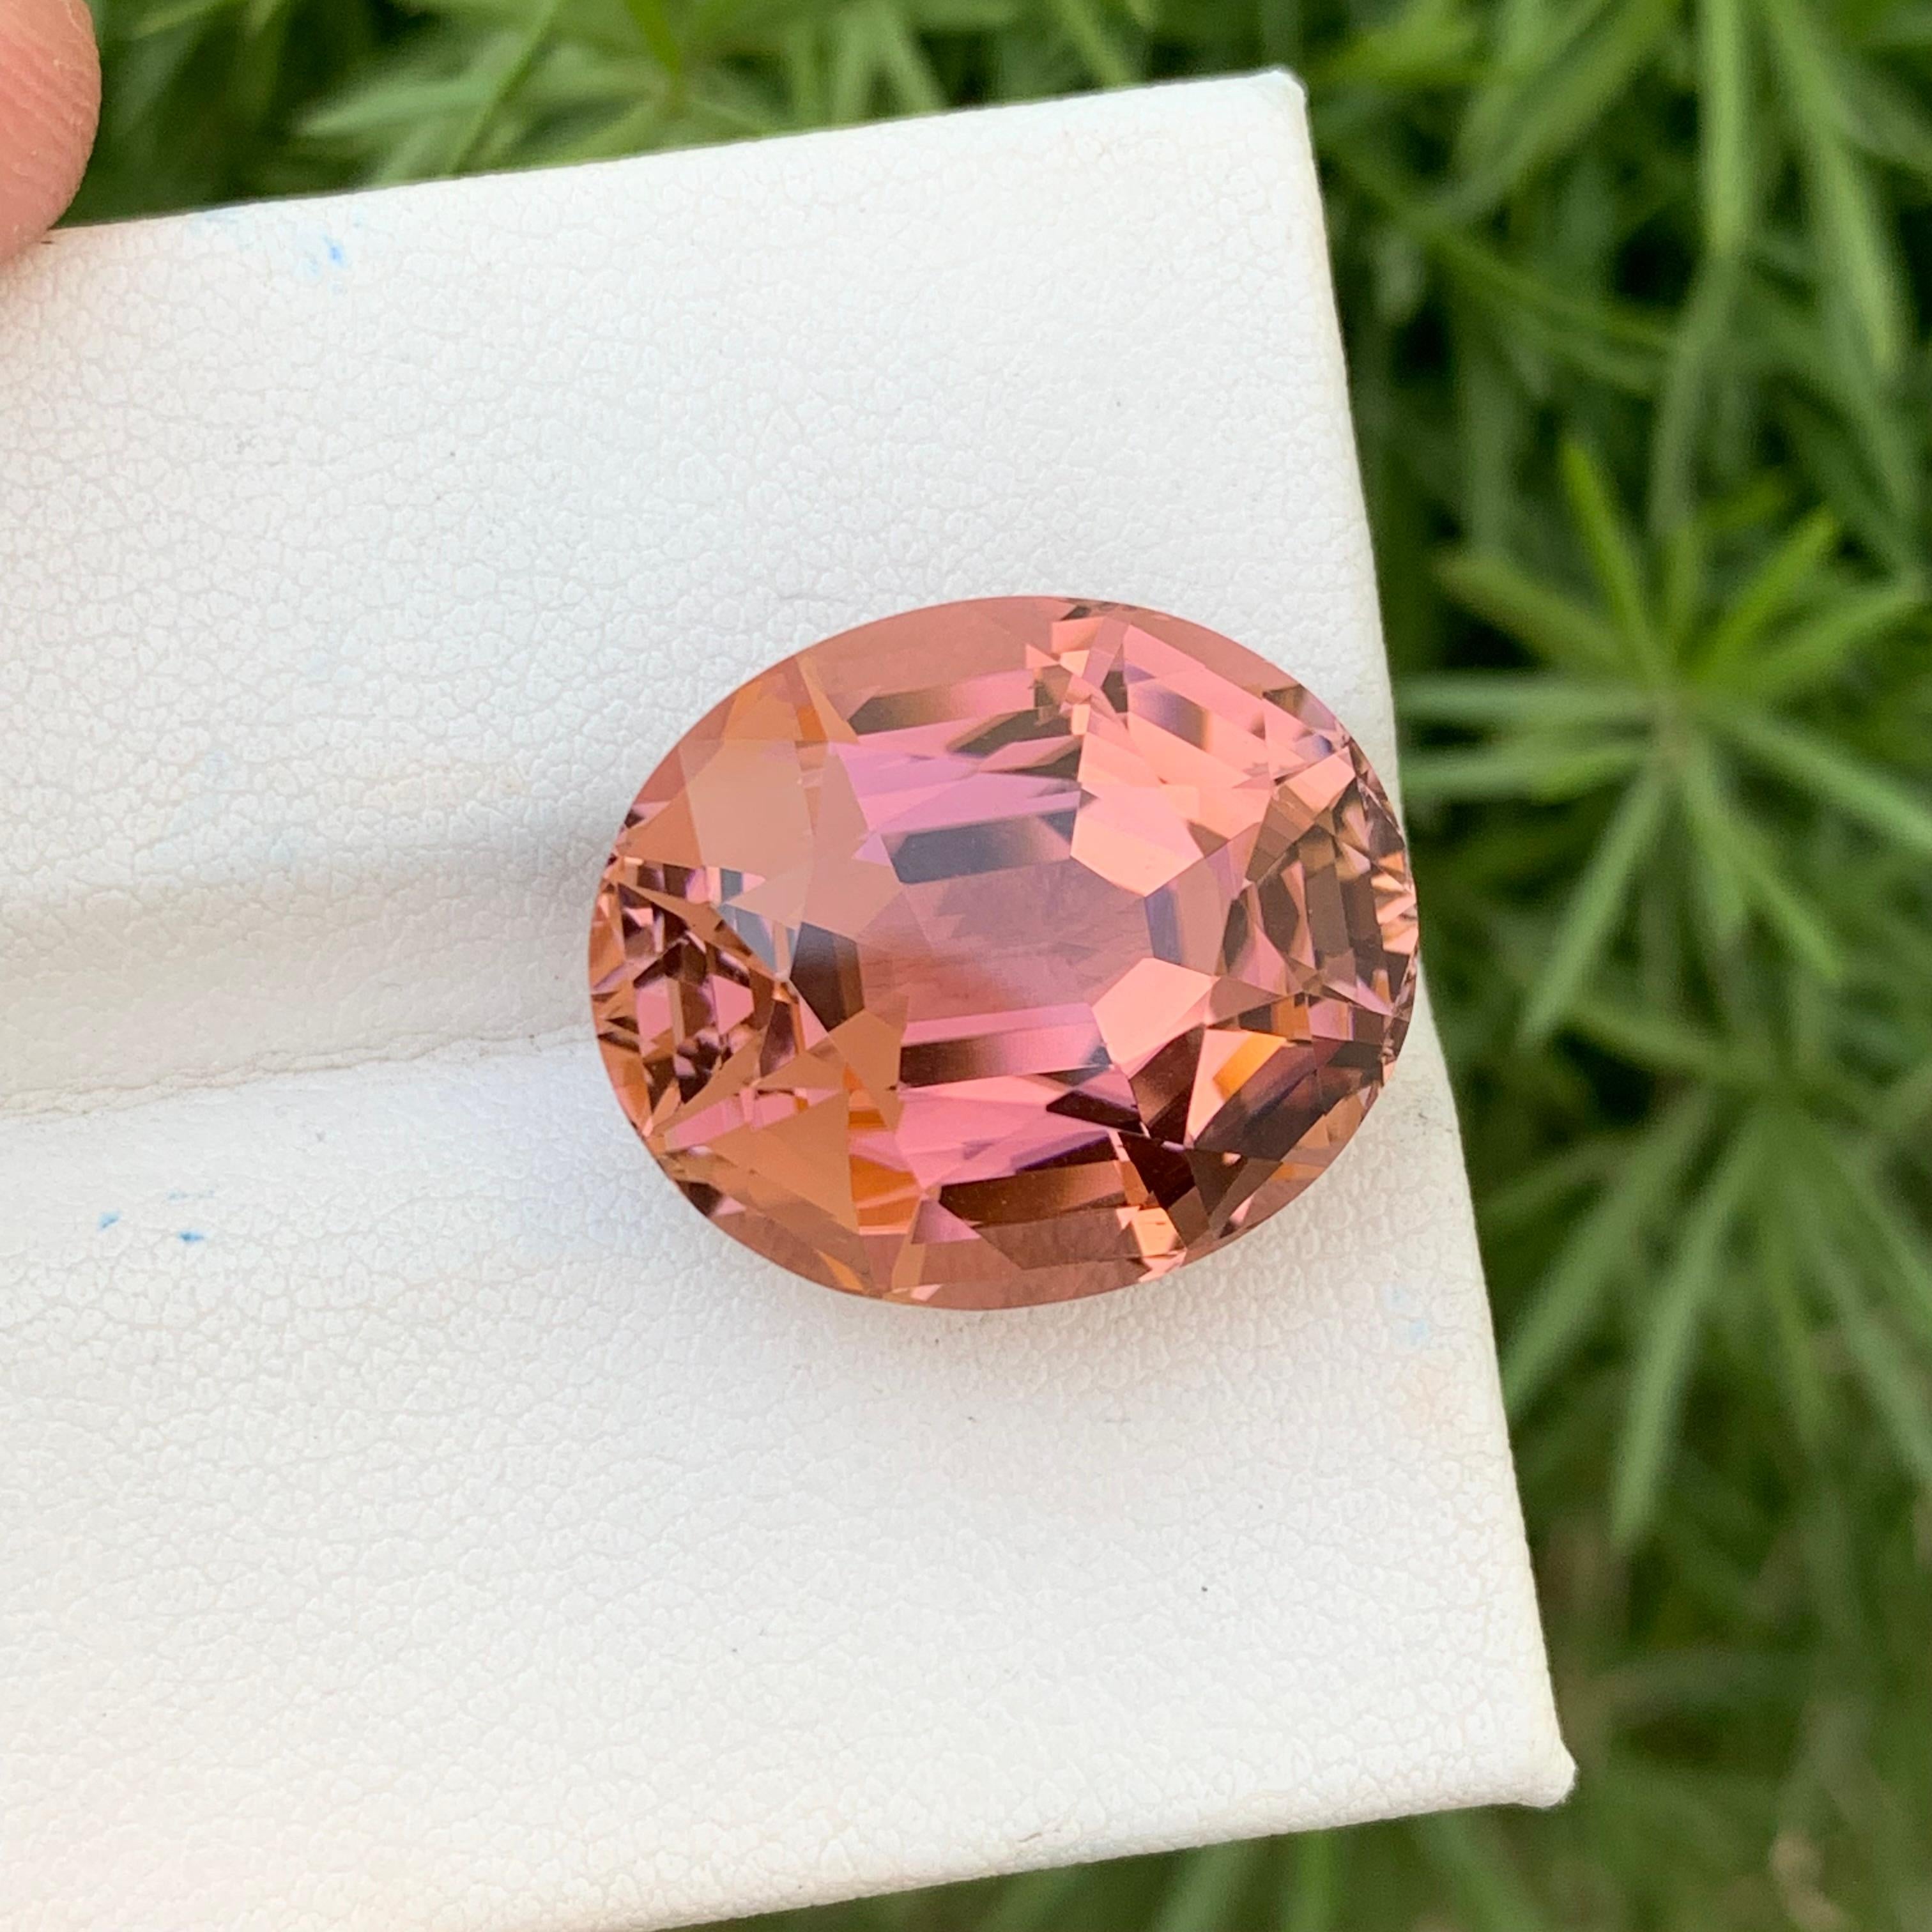 Loose Tourmaline 
Weight: 21.40 Carats 
Dimension: 18.7x15.9x11.4 Mm
Origin: Kunar Afghanistan 
Shape: Oval
Treatment: Non
Color: Peach
Certificate: On Demand
Peach Tourmaline, a gemstone bathed in warm hues reminiscent of a delicate sunrise,